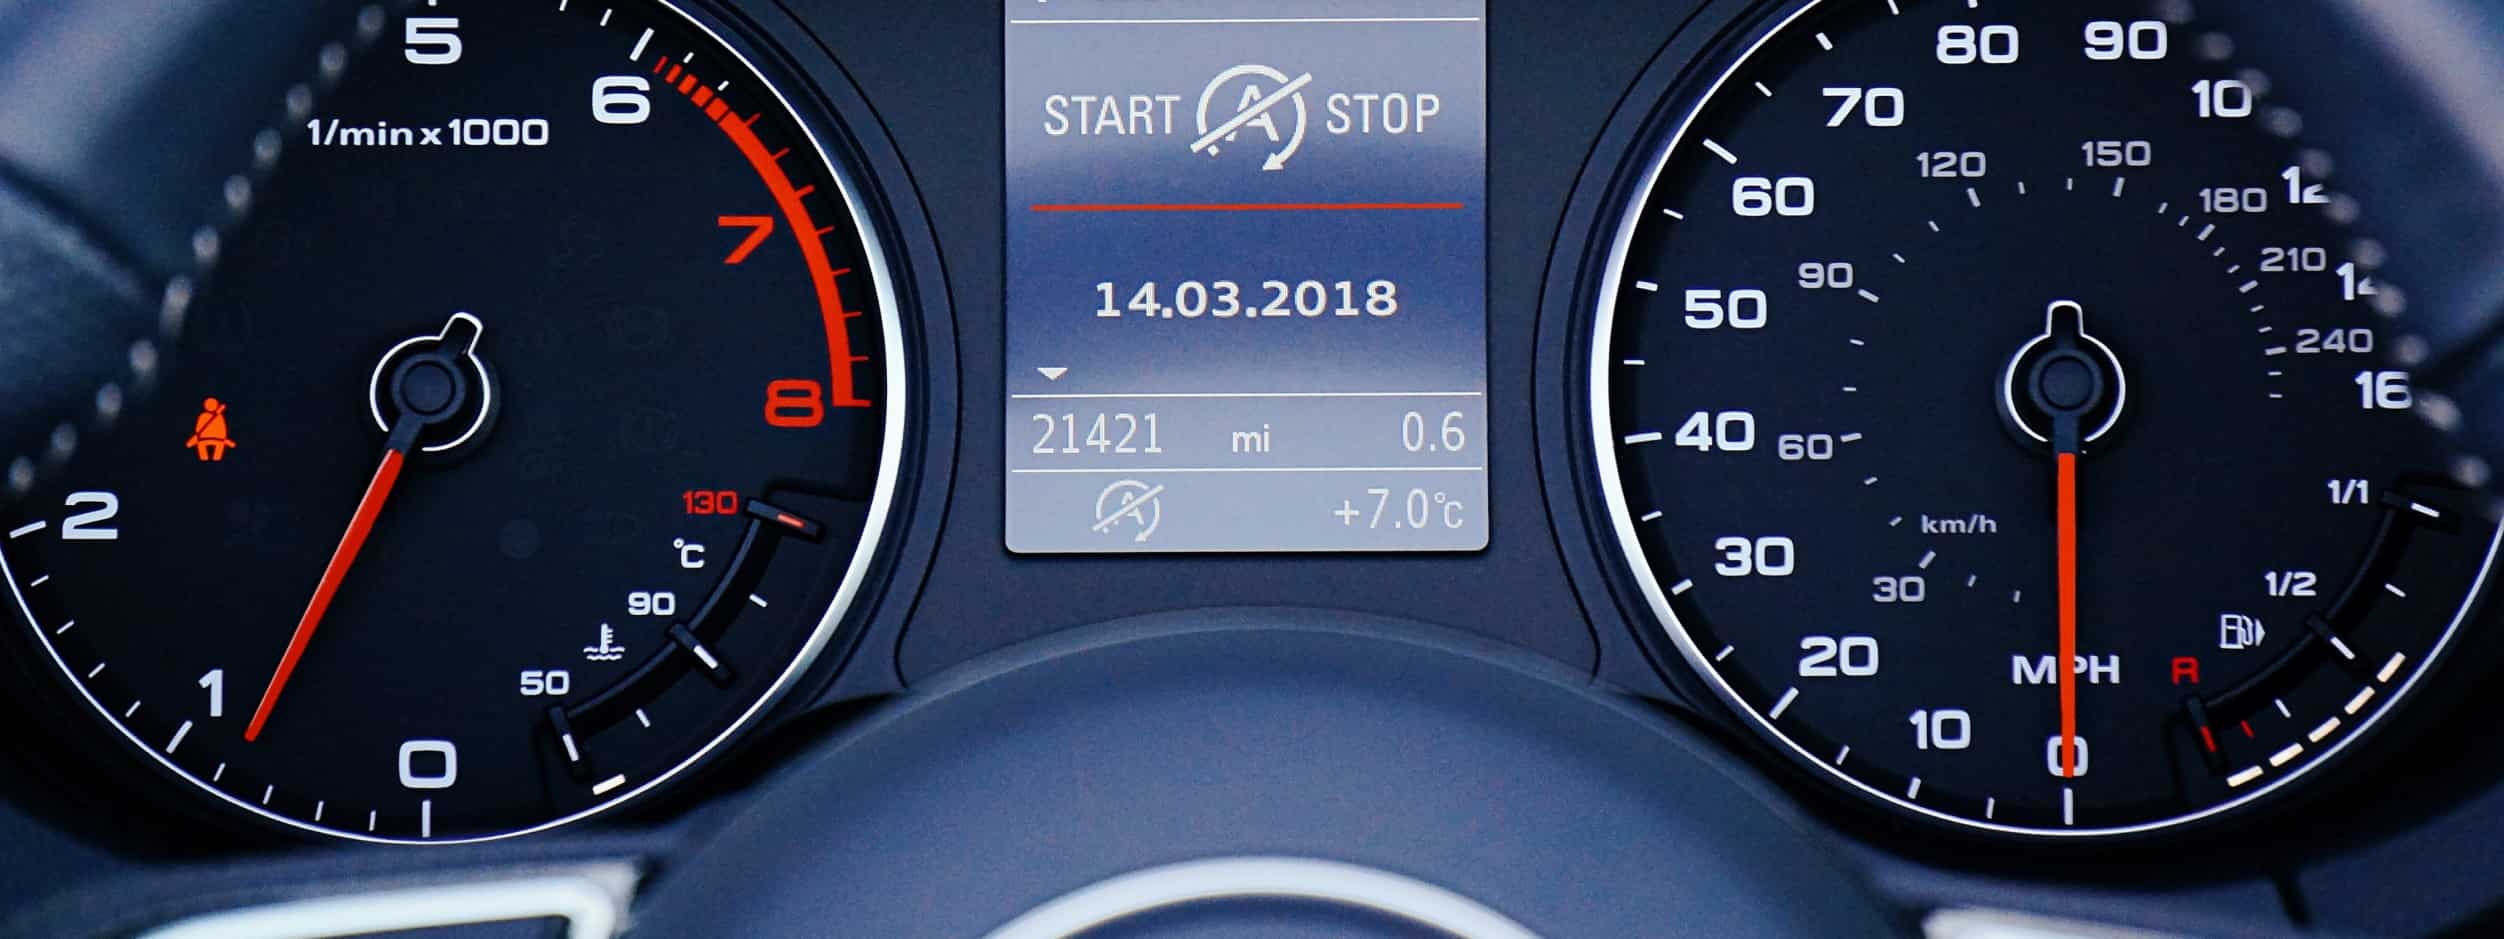 Dashboard of a vehicle showing the odometer. 